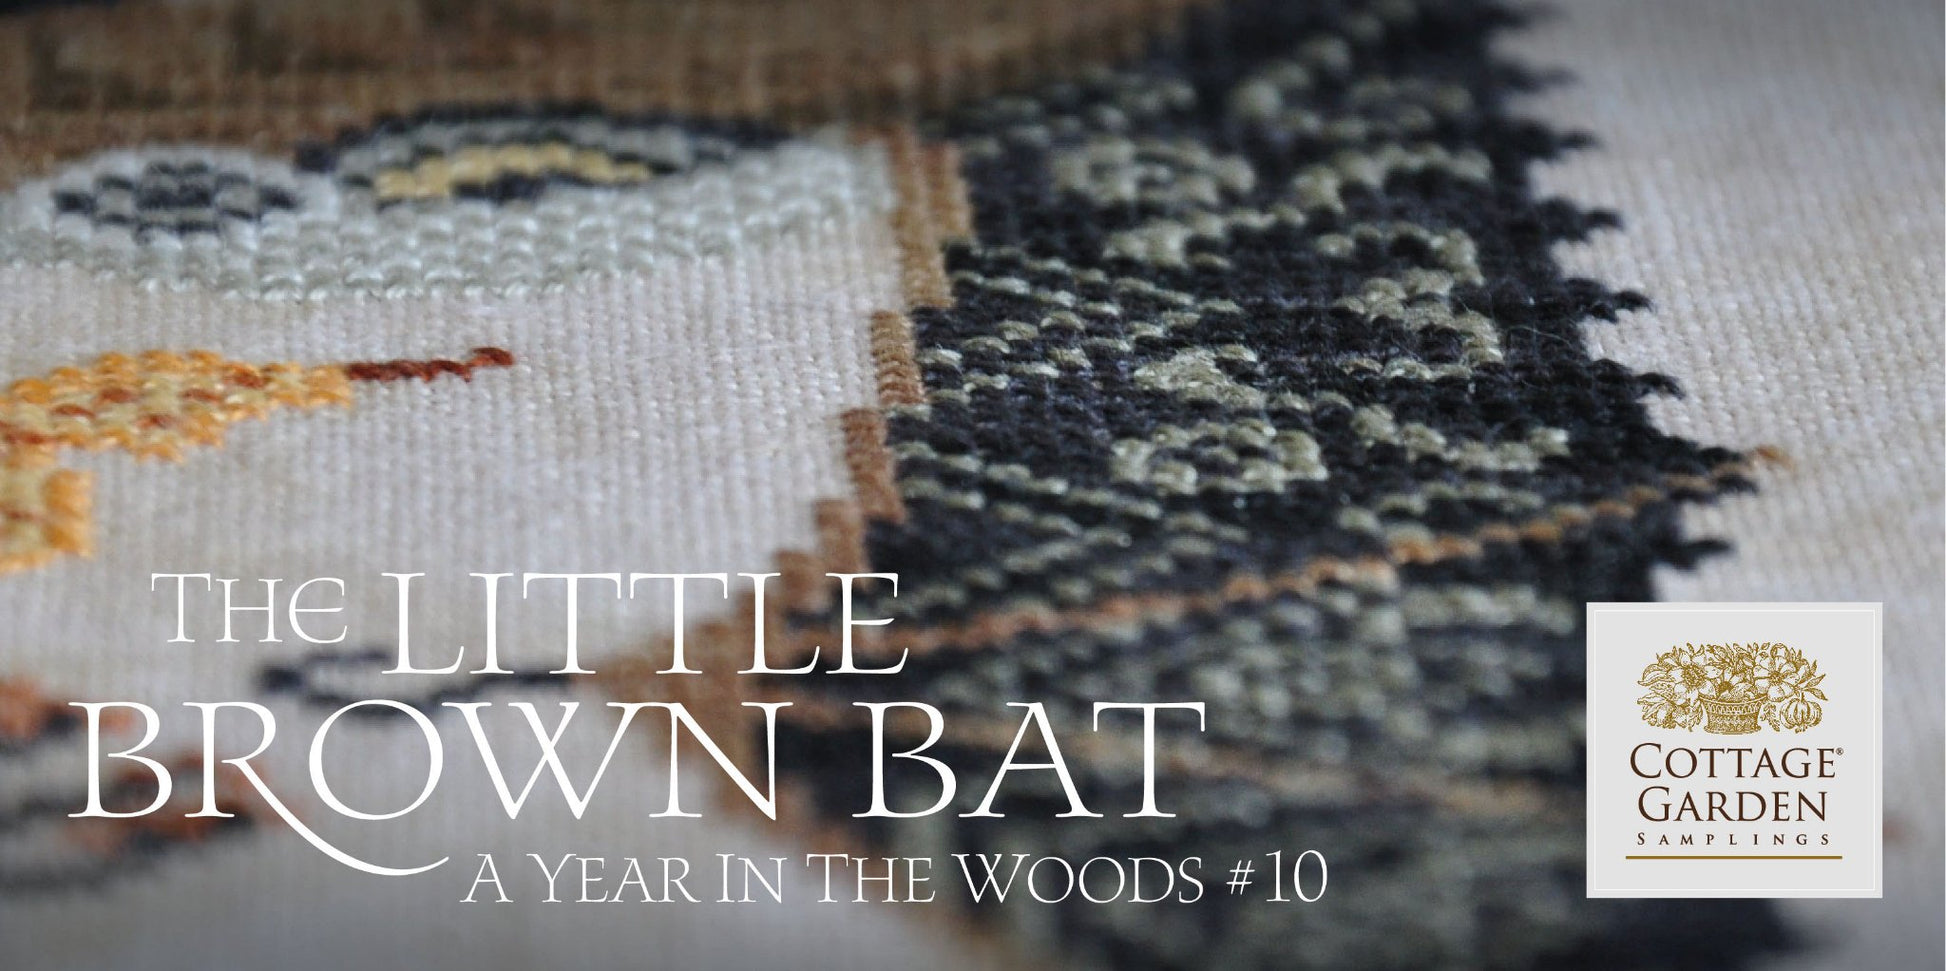 A Year in the Woods 10 - The Little Brown Bat - Cottage Garden Samplings - Cross Stitch Pattern, Needlecraft Patterns, Needlecraft Patterns, The Crafty Grimalkin - A Cross Stitch Store